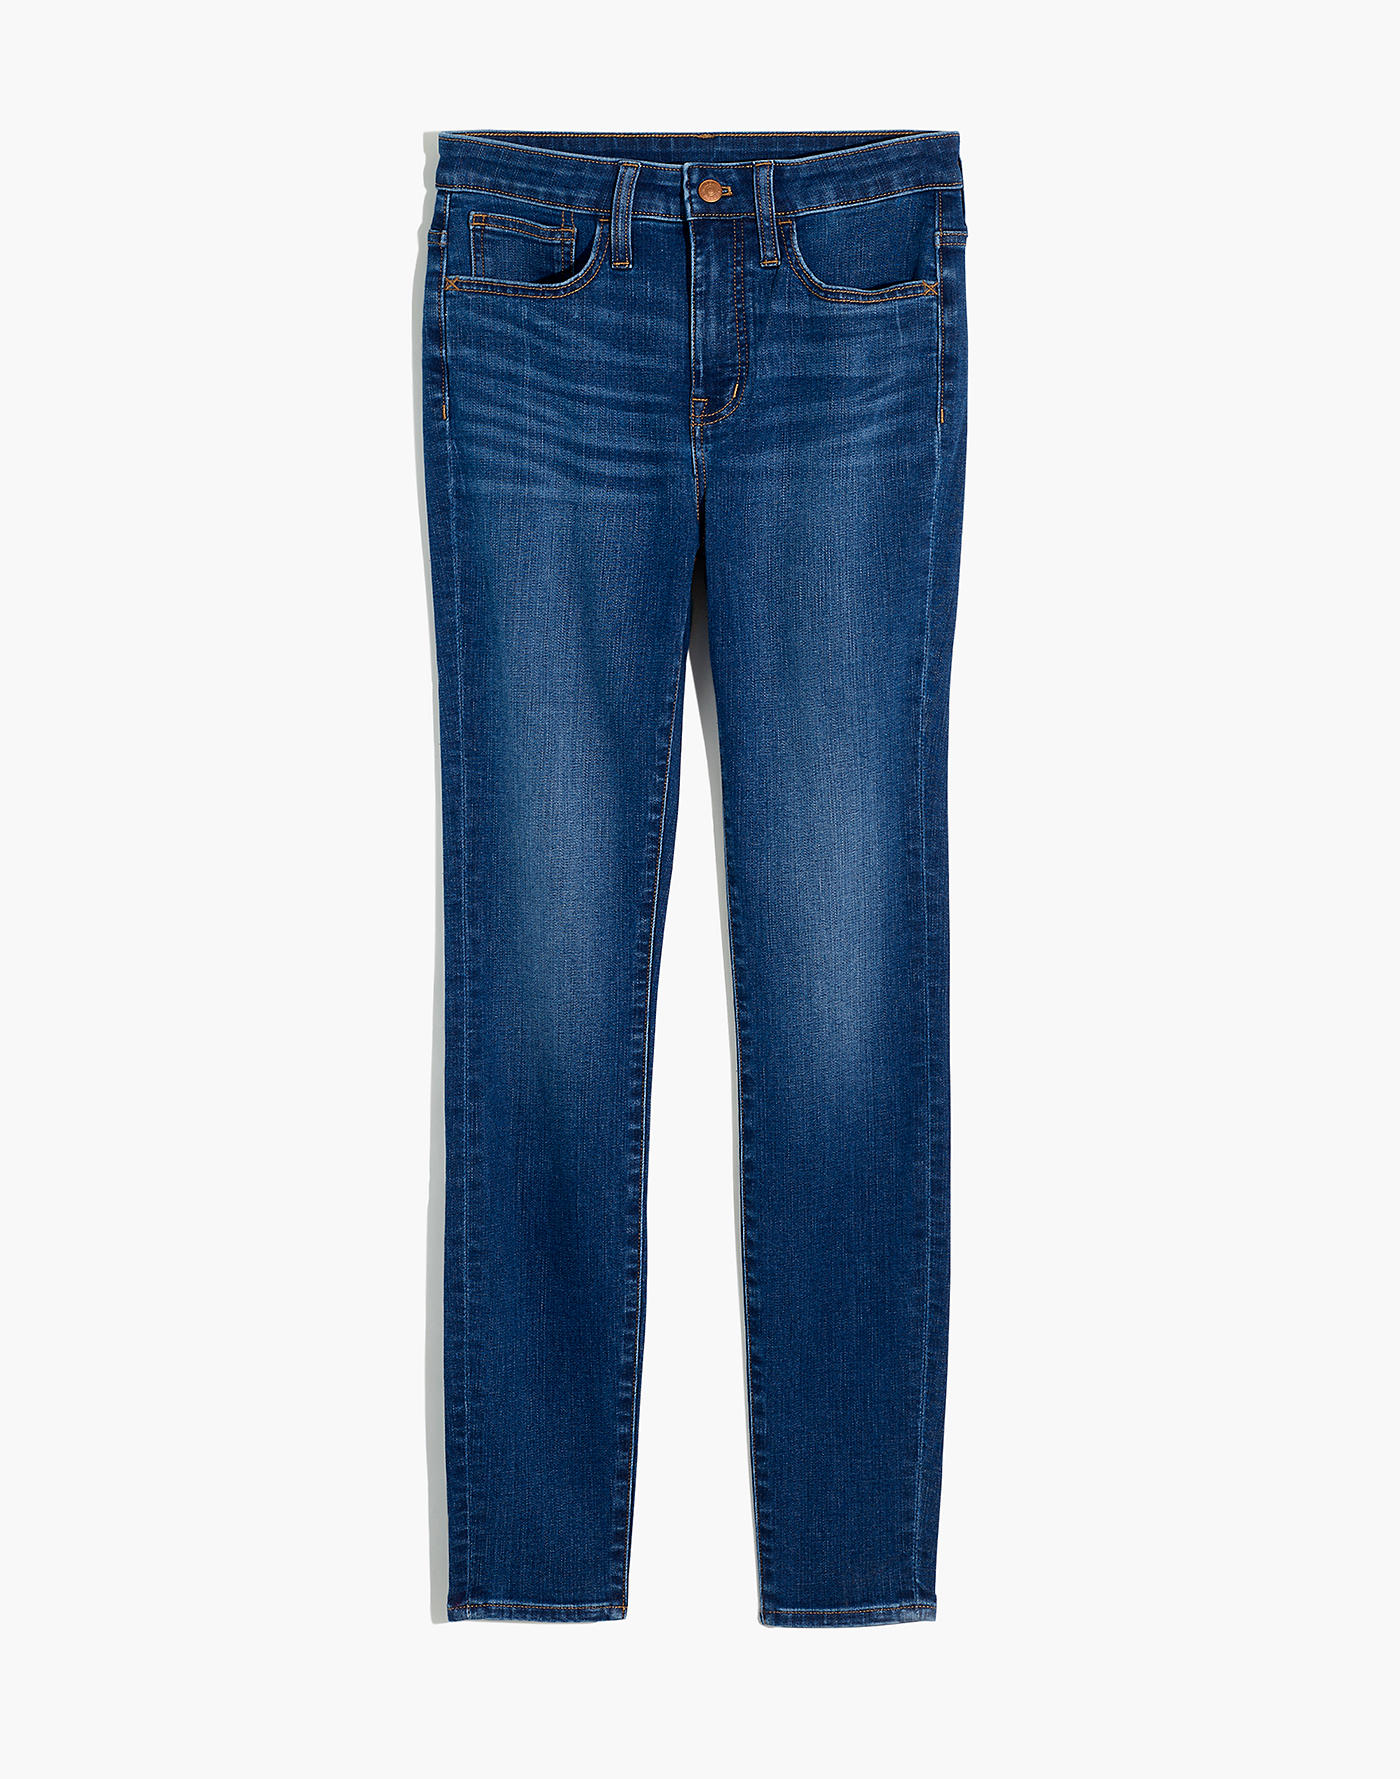 Madewell Roadtripper Jeans | Recent Finds, 4/17 - Kelly in the City